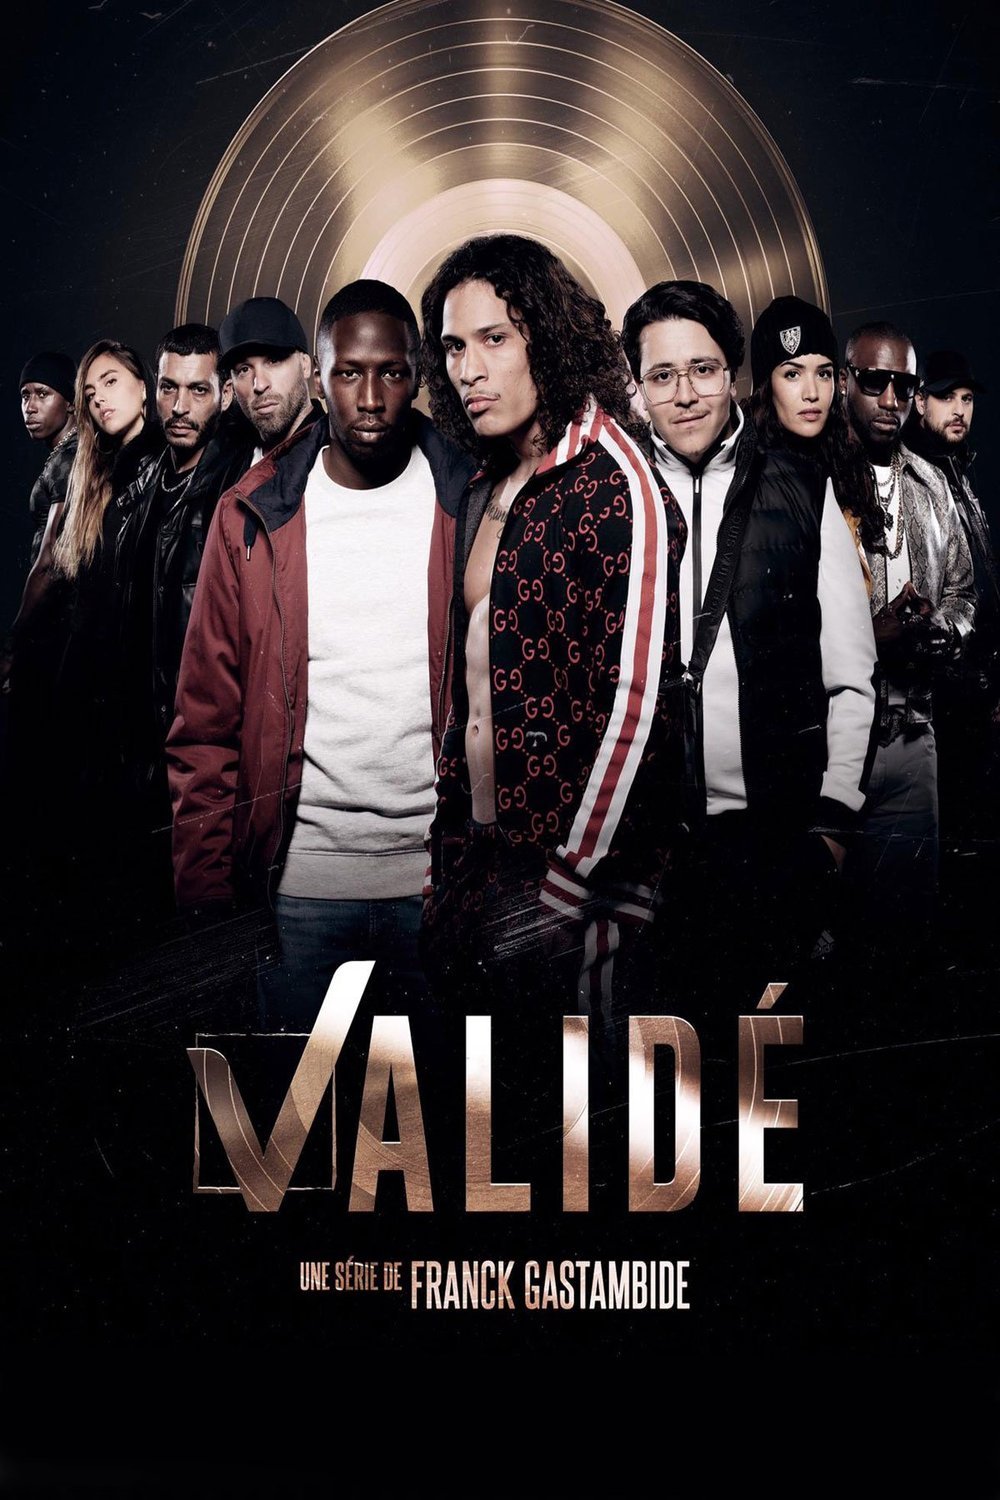 French poster of the movie Validé